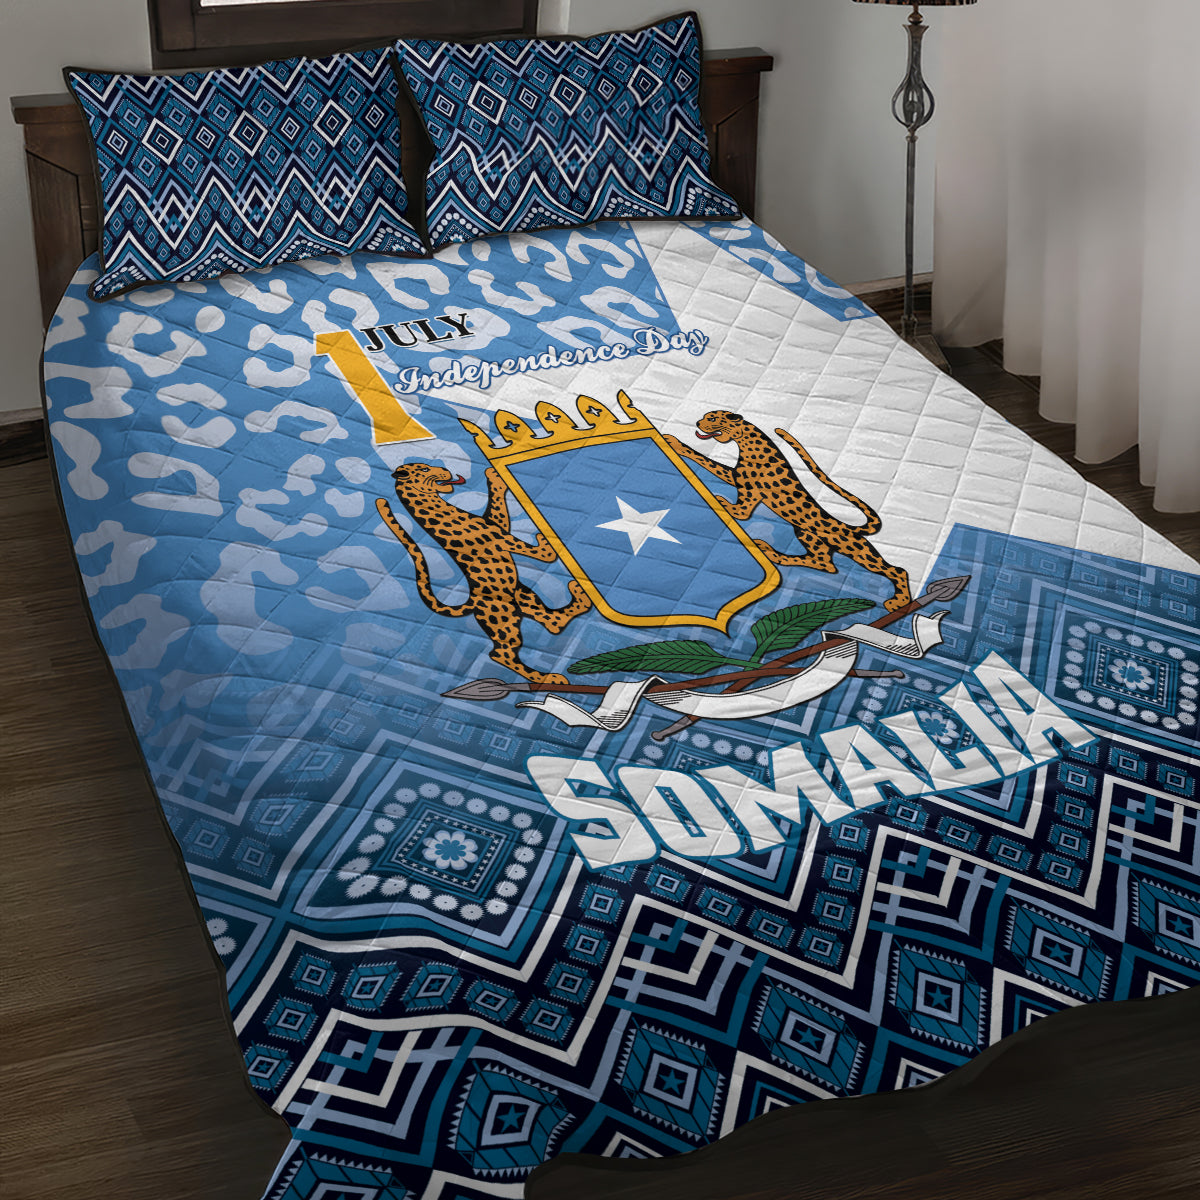 Somalia Independence Day 2024 Quilt Bed Set Somali Star Leopard Mix African Pattern